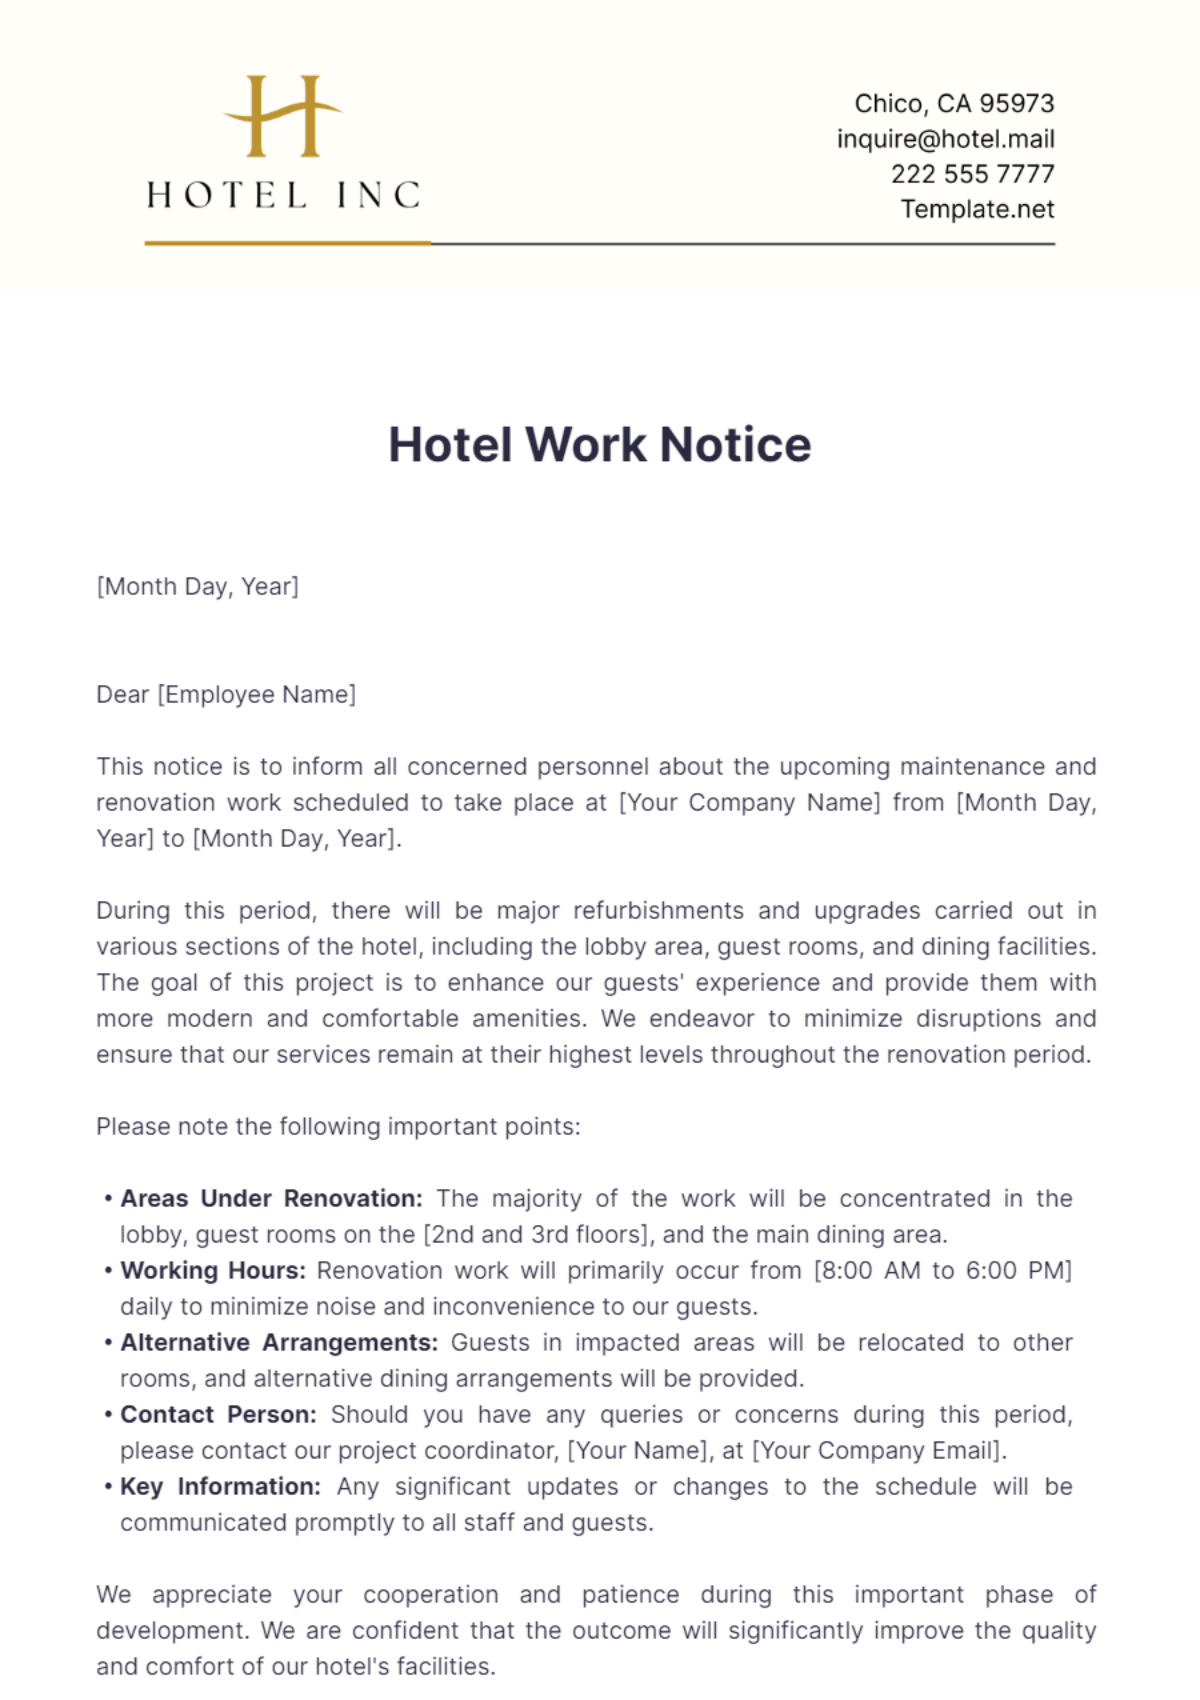 Free Hotel Work Notice Template